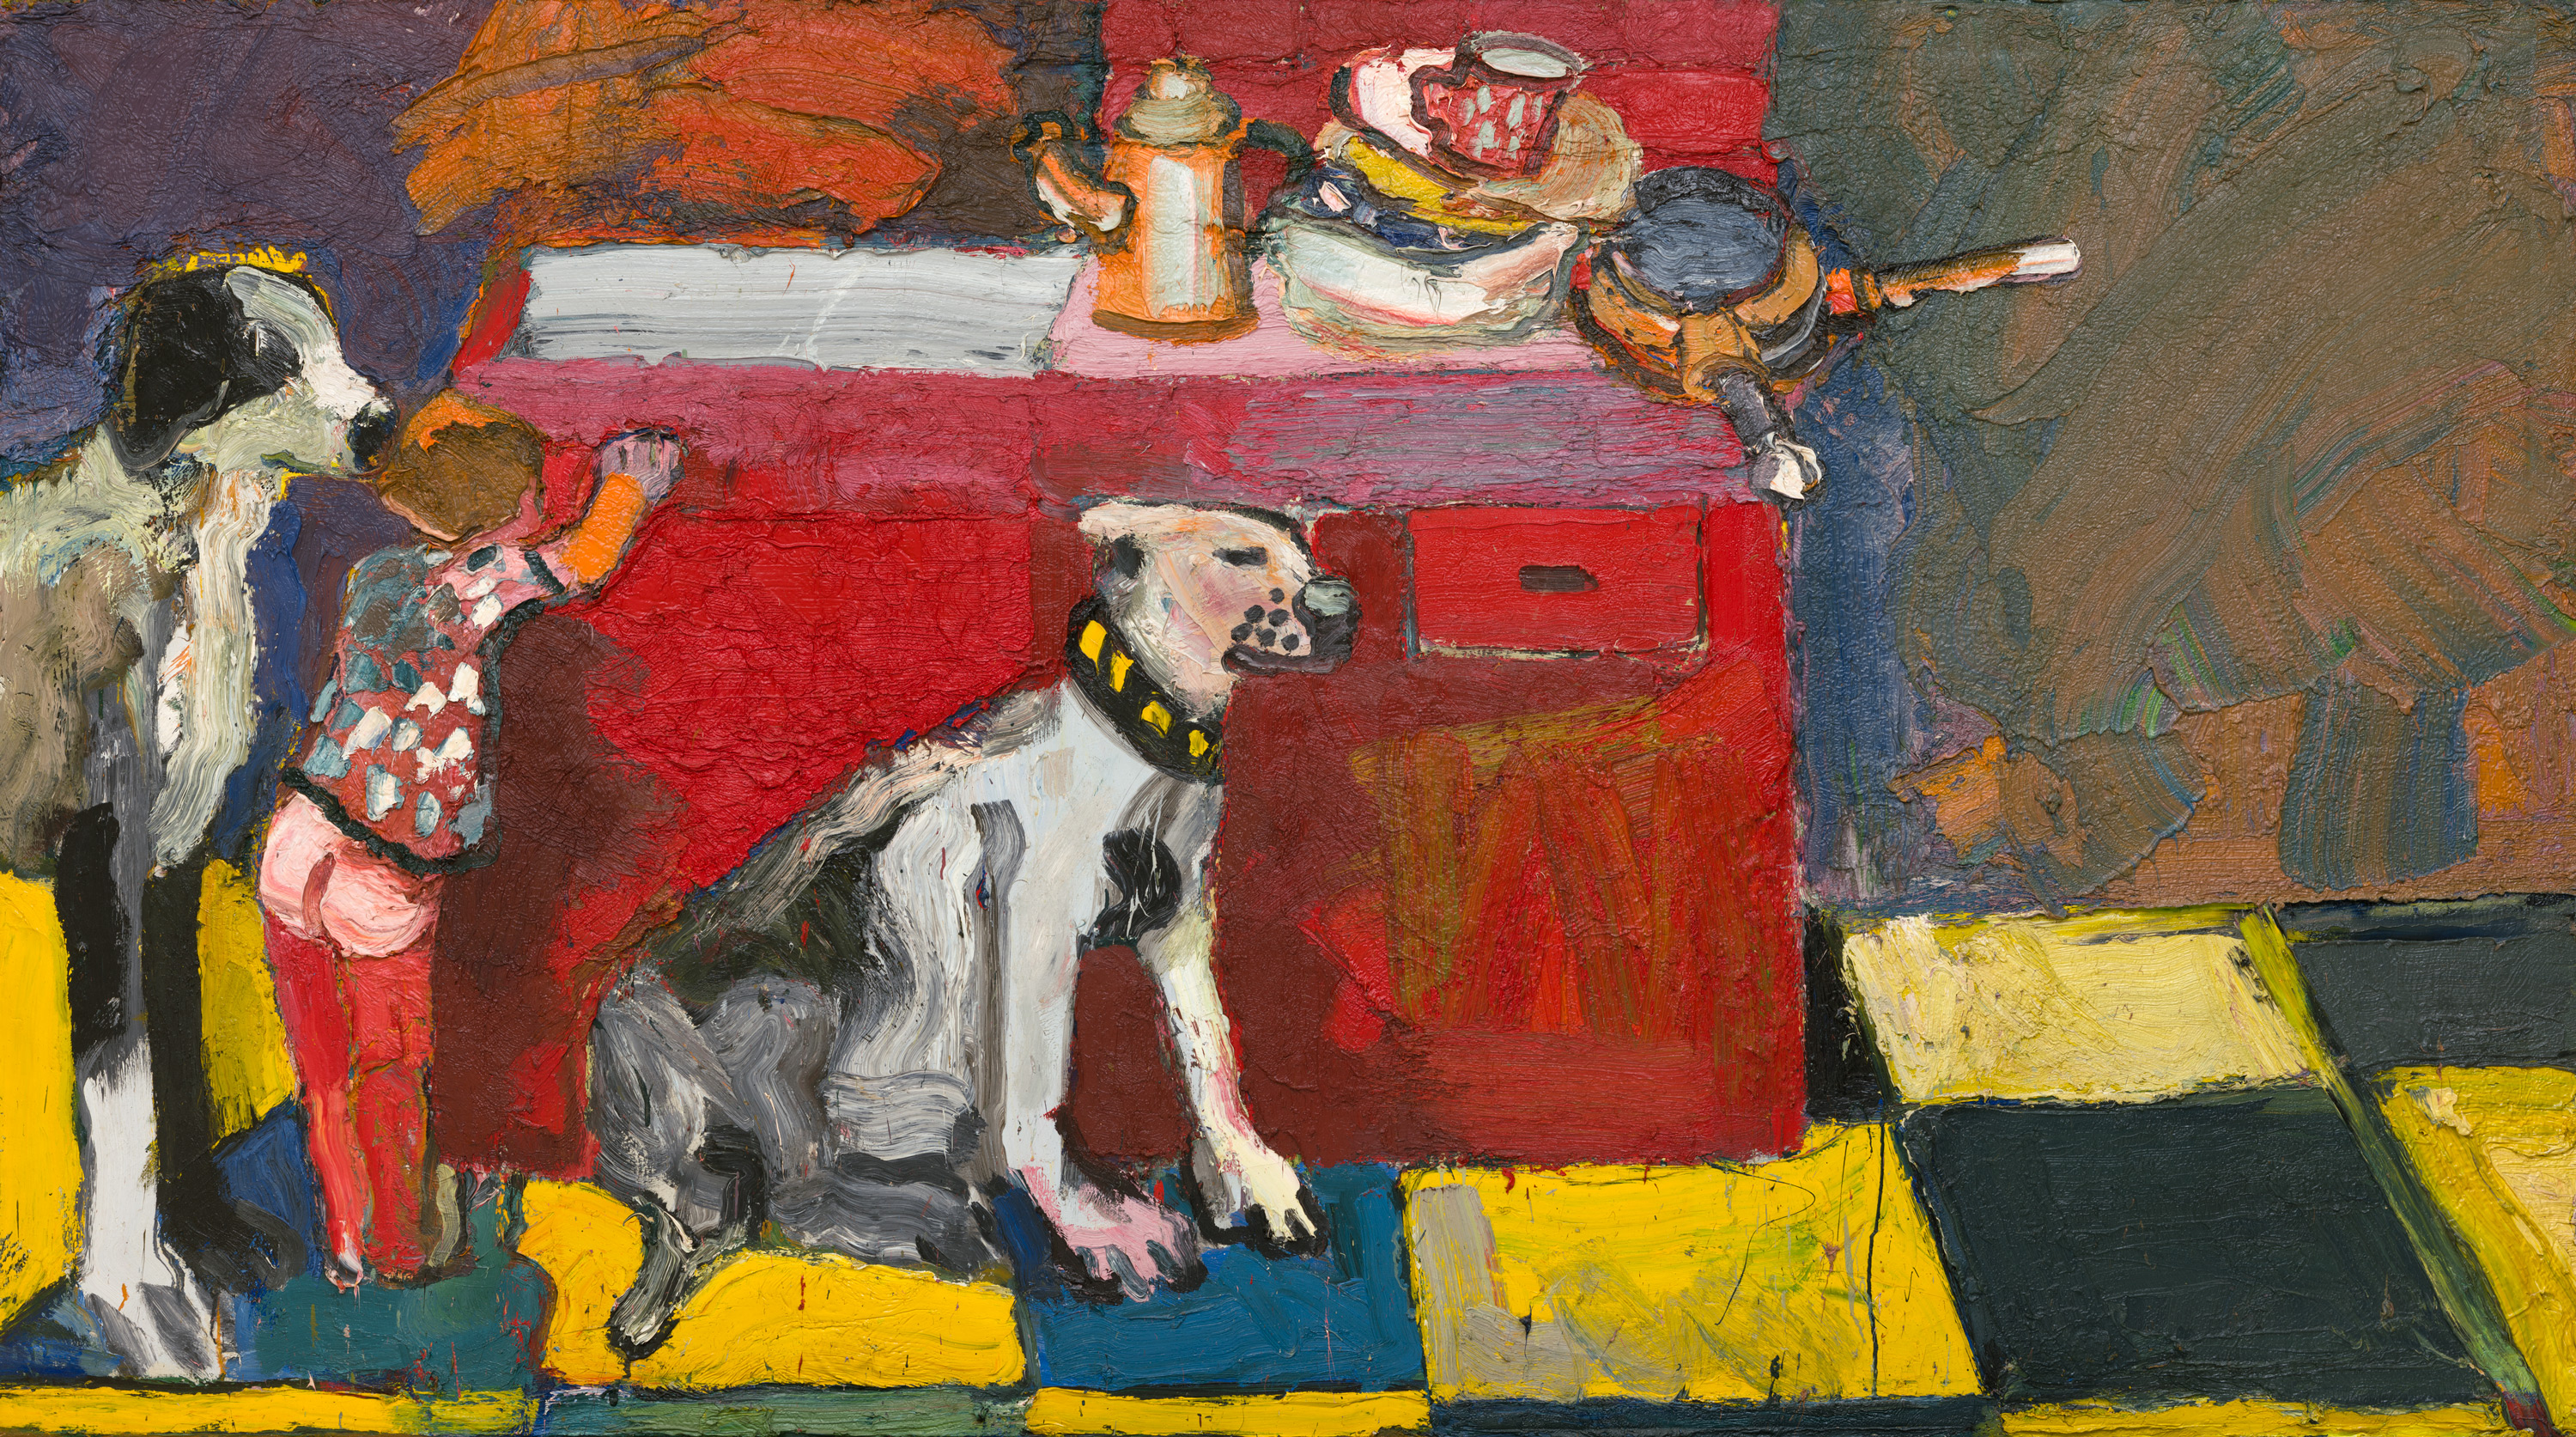 Noel in the Kitchen by Joan Brown. Features two dogs and a child in a kitchen